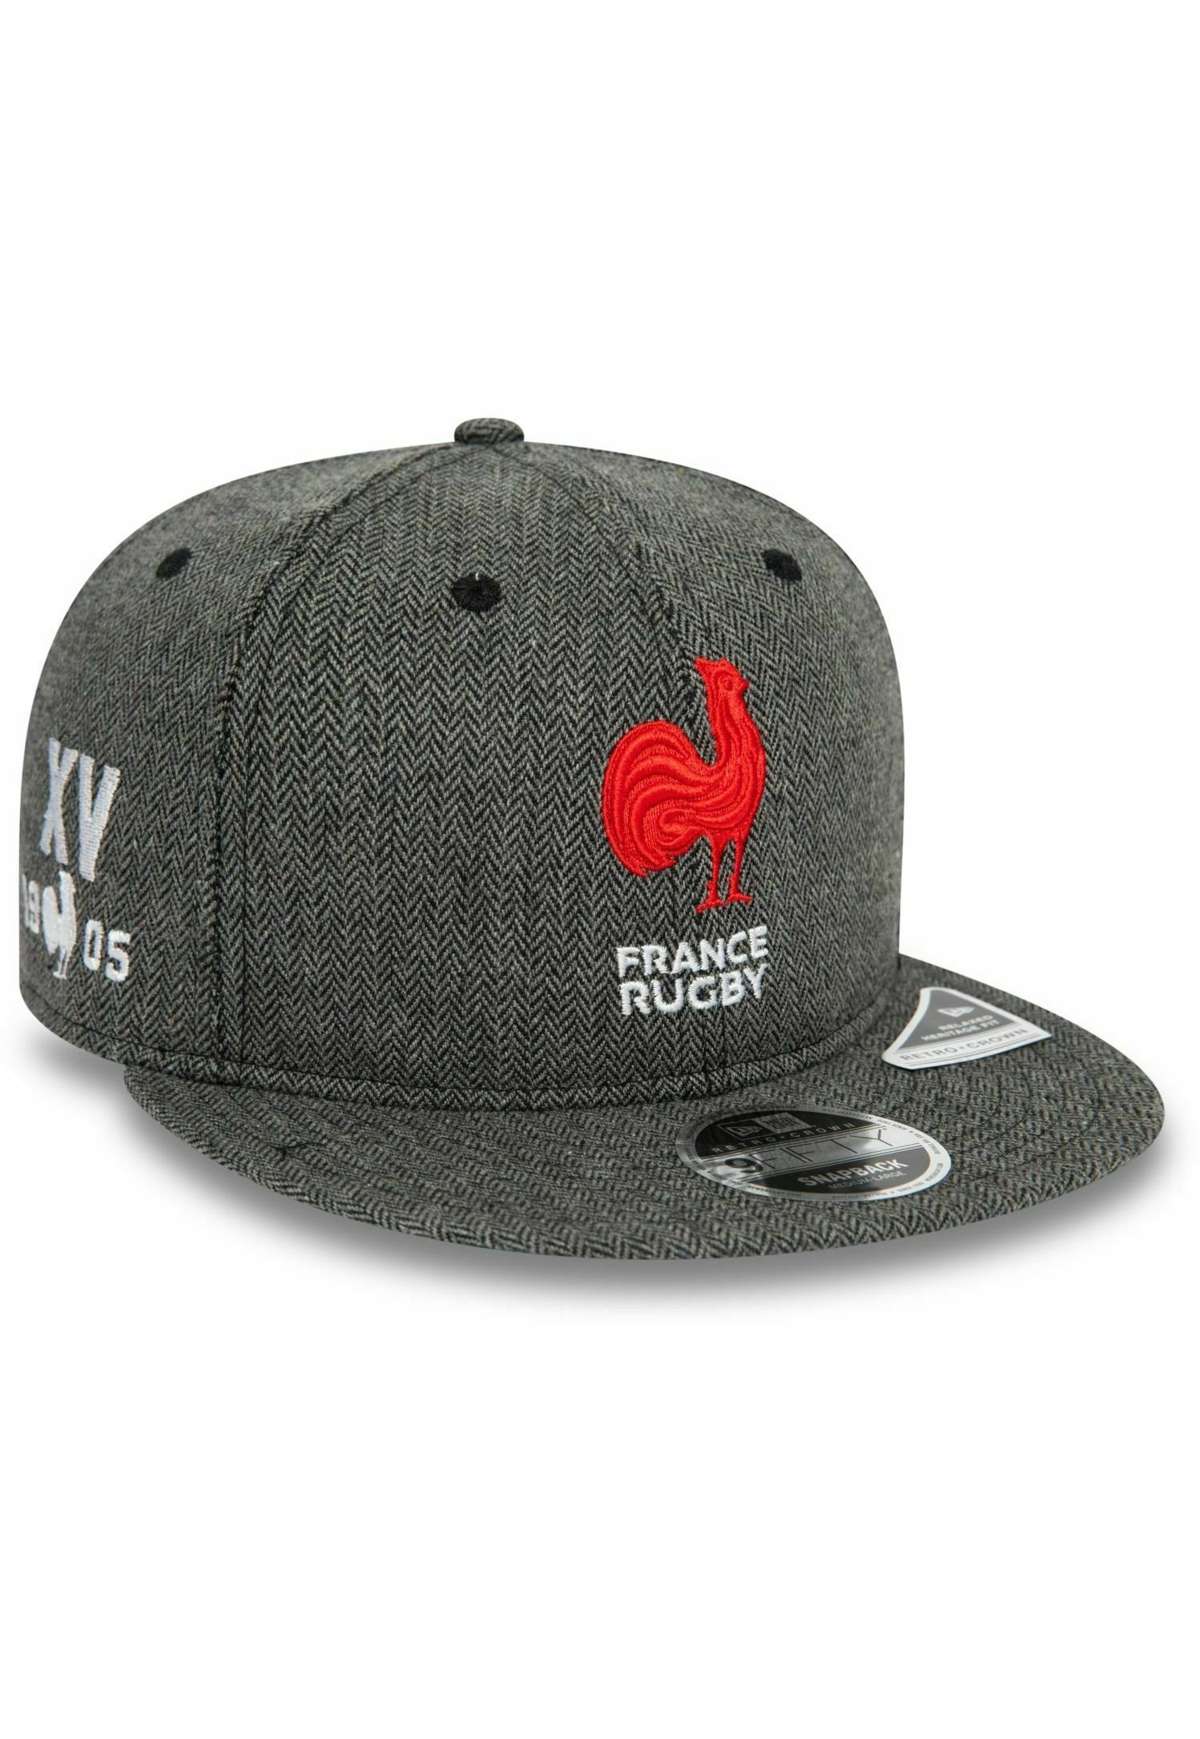 Кепка 9FIFTY STRAPBACK HERTIAGE FRECH RUGBY